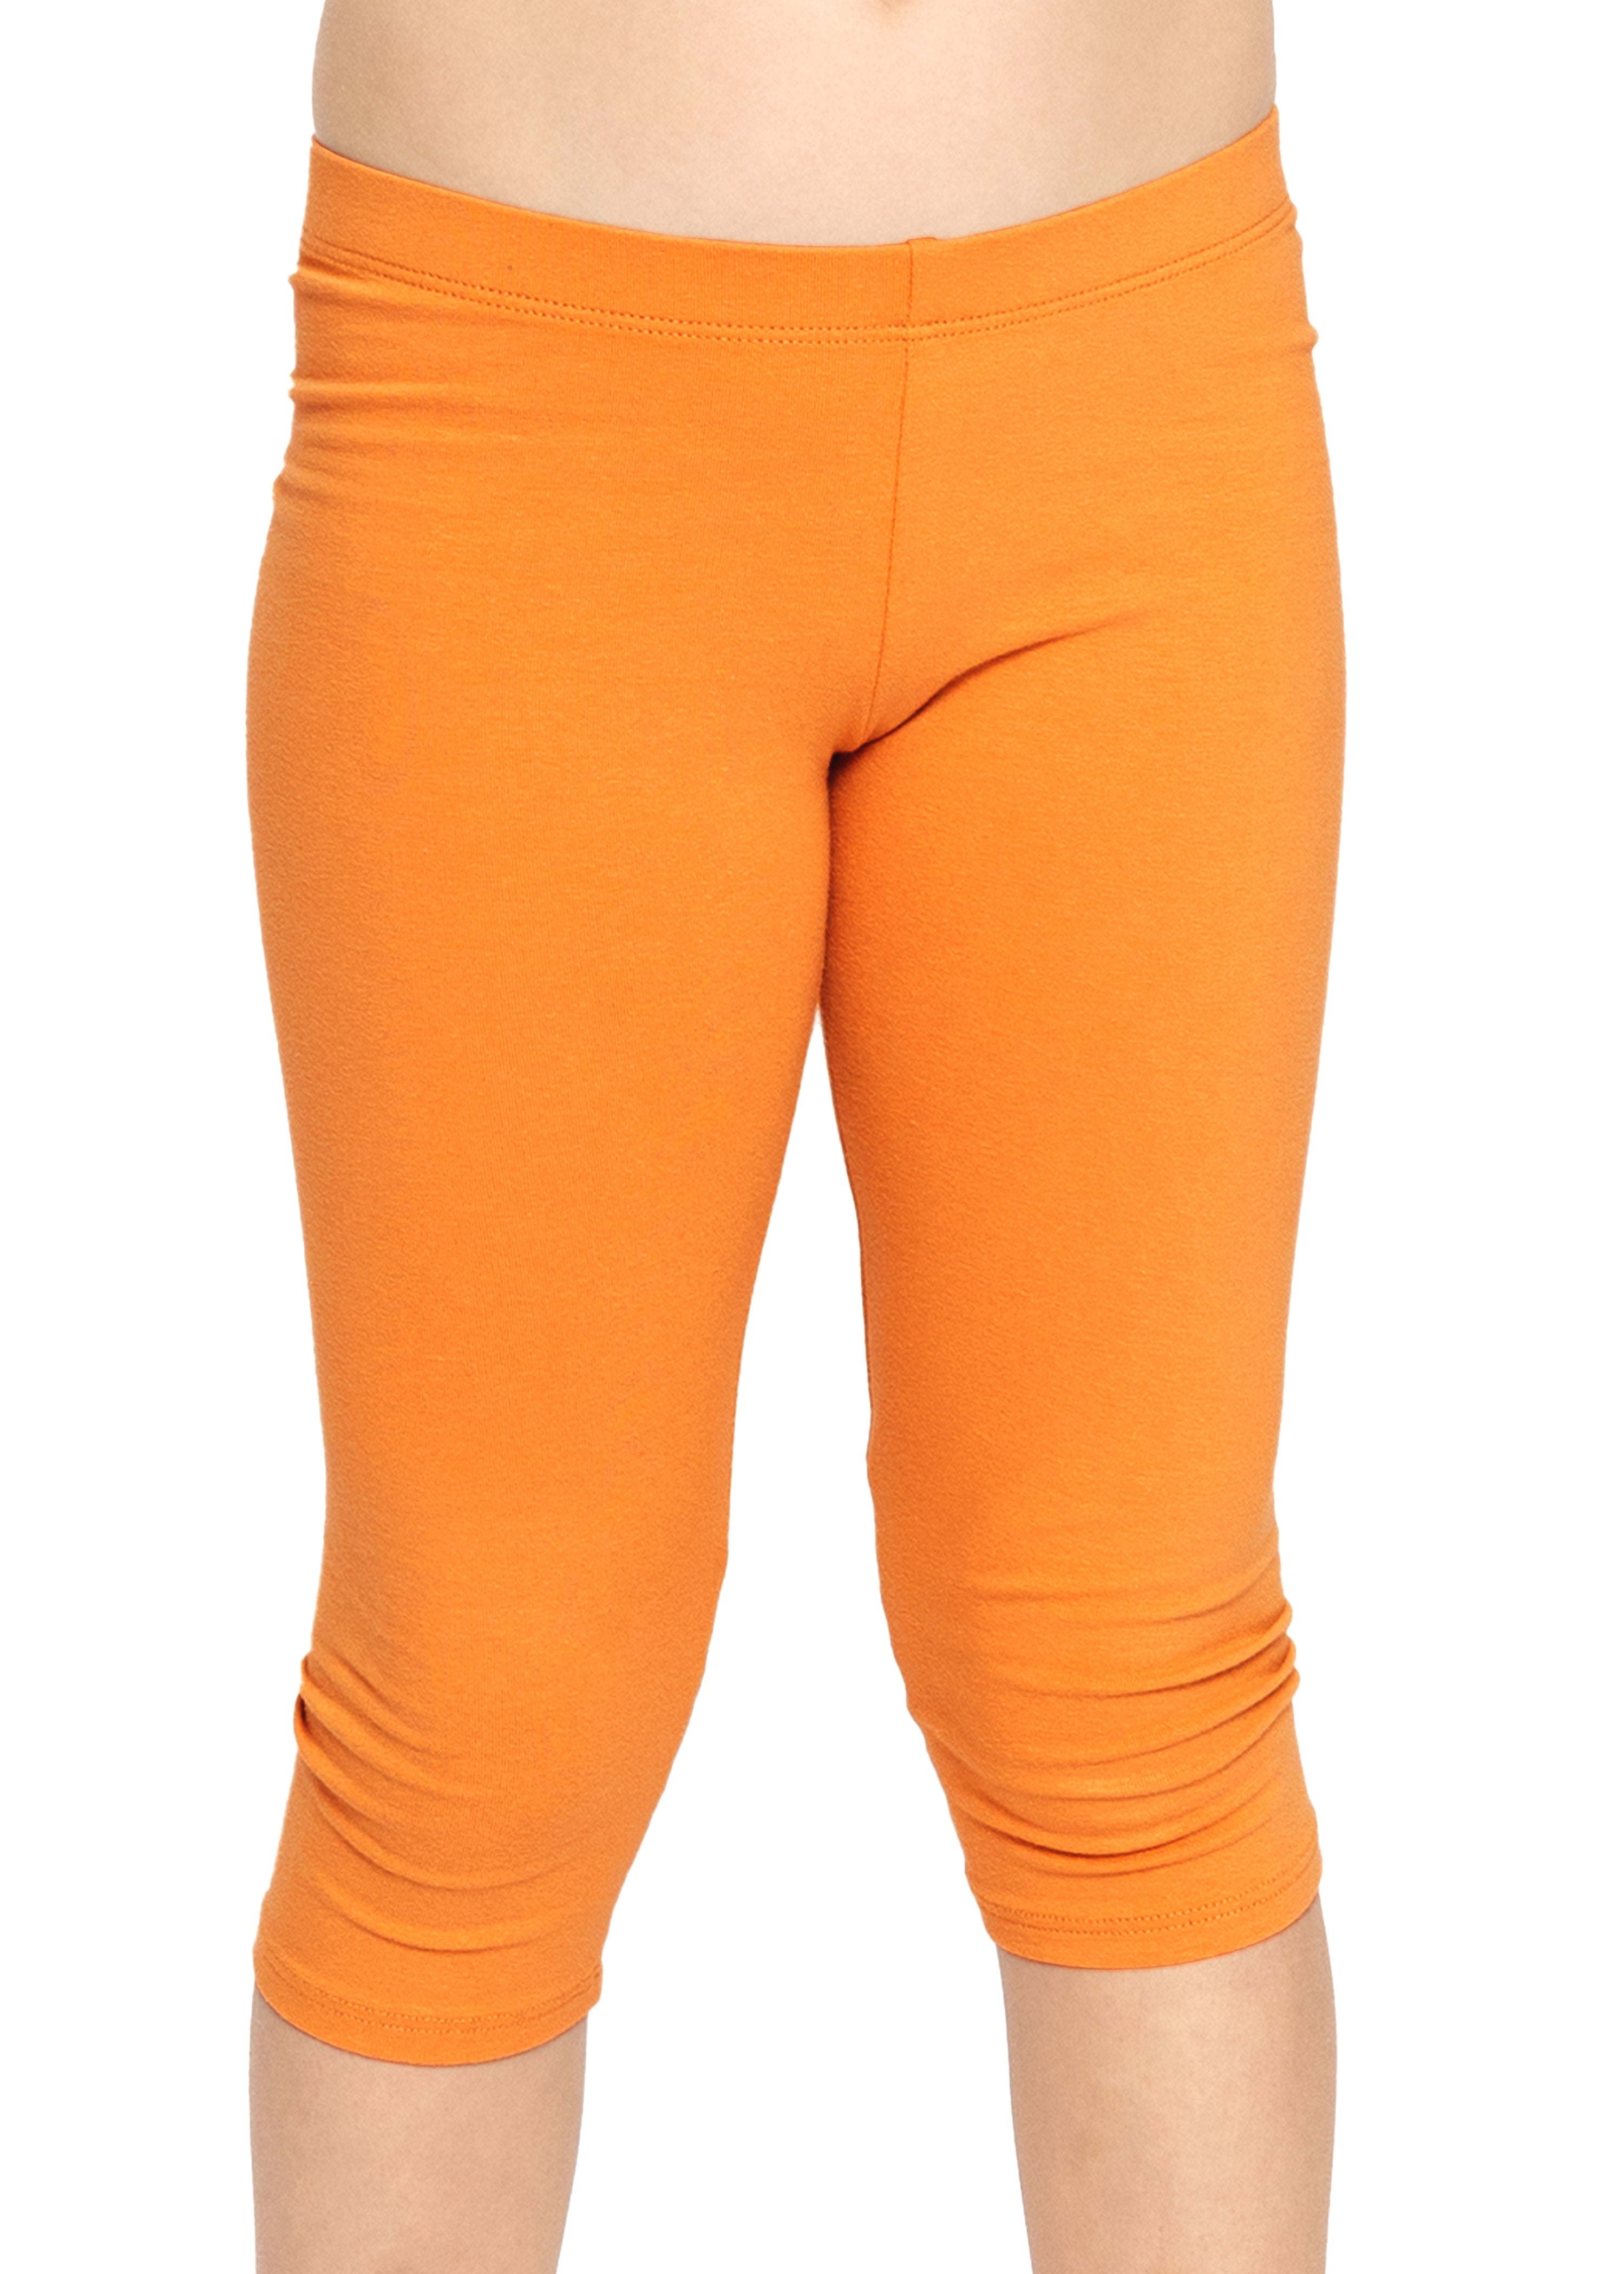 Buy Stunning Collection Women's Stretch Fit Cotton Leggings  (SCTALLLACECAPRI_1_Orange_Free Size) at